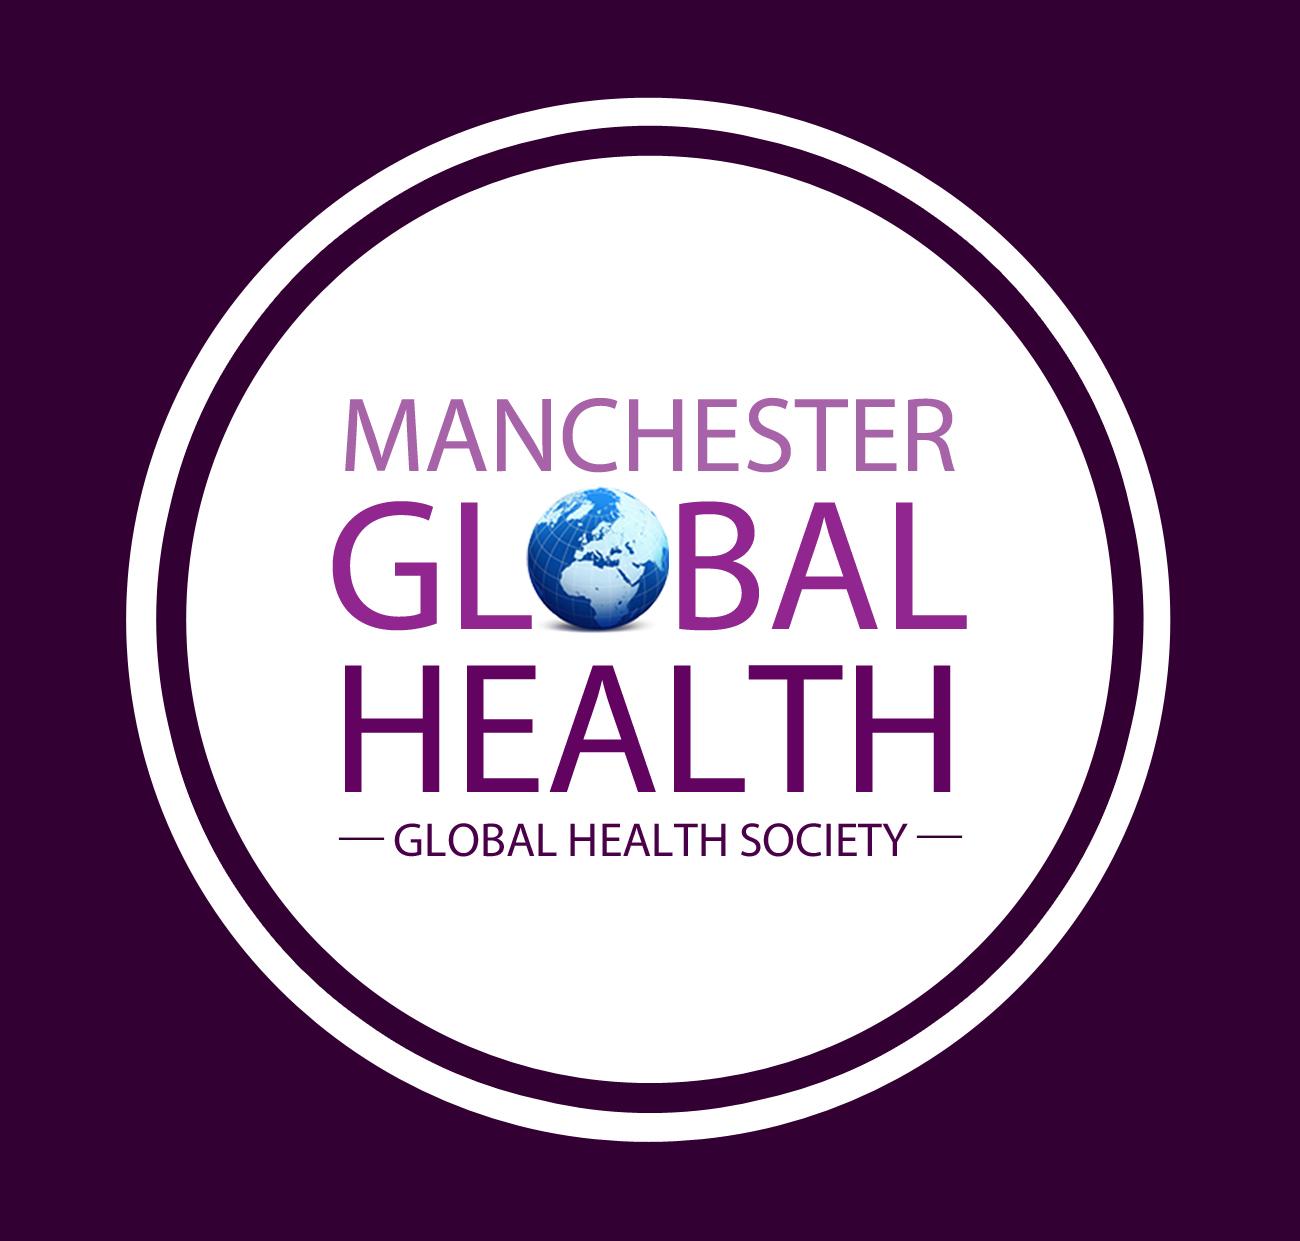 Bringing Global Health closer to home @ the University of Manchester & beyond

| Outstanding Contributions to Public Health Award 2015
#GlobalHealthMCR